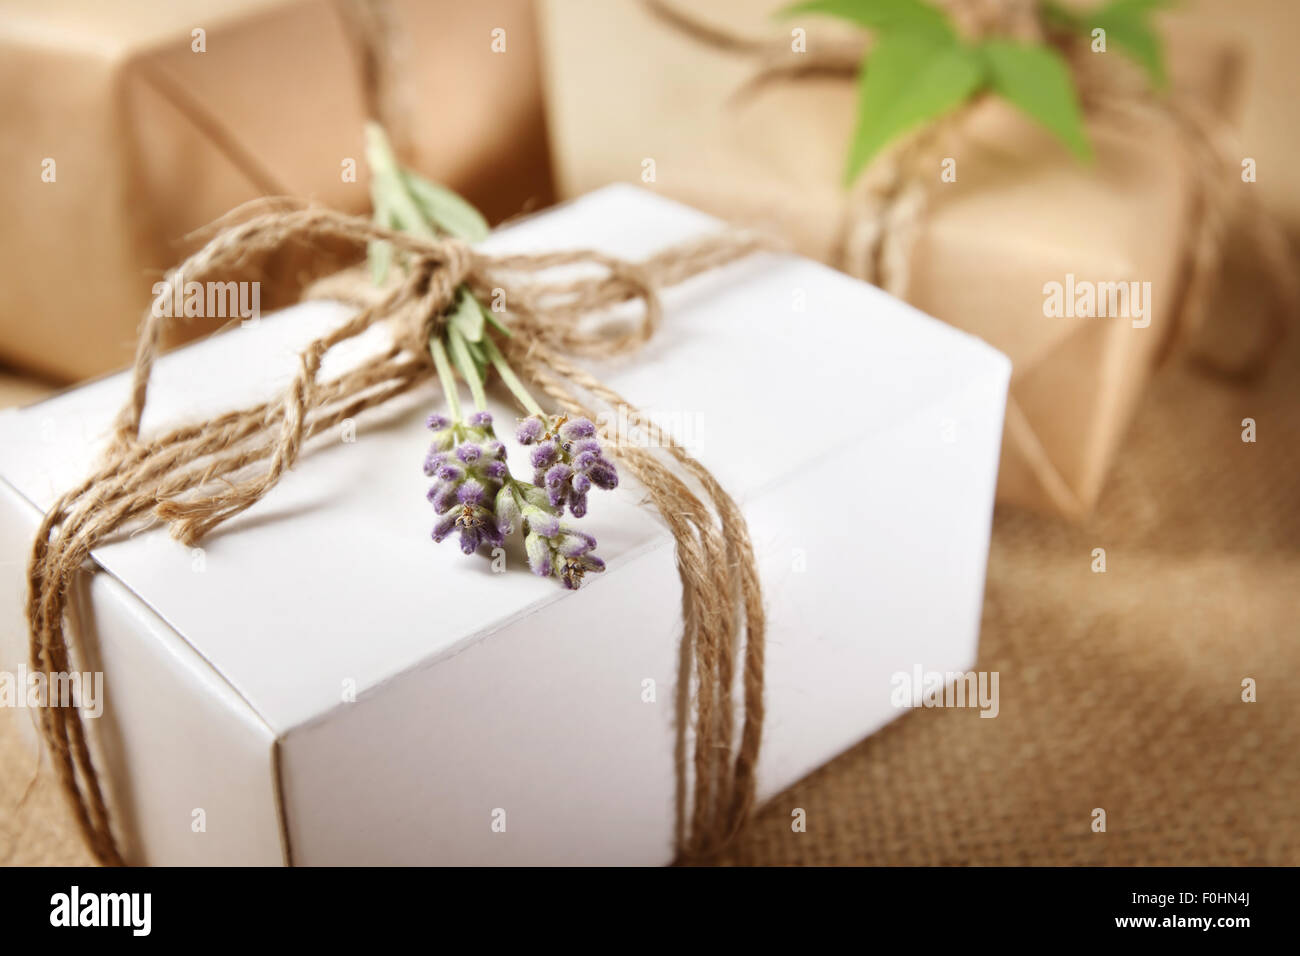 Handmade gift box with lavender sprig on burlap Stock Photo